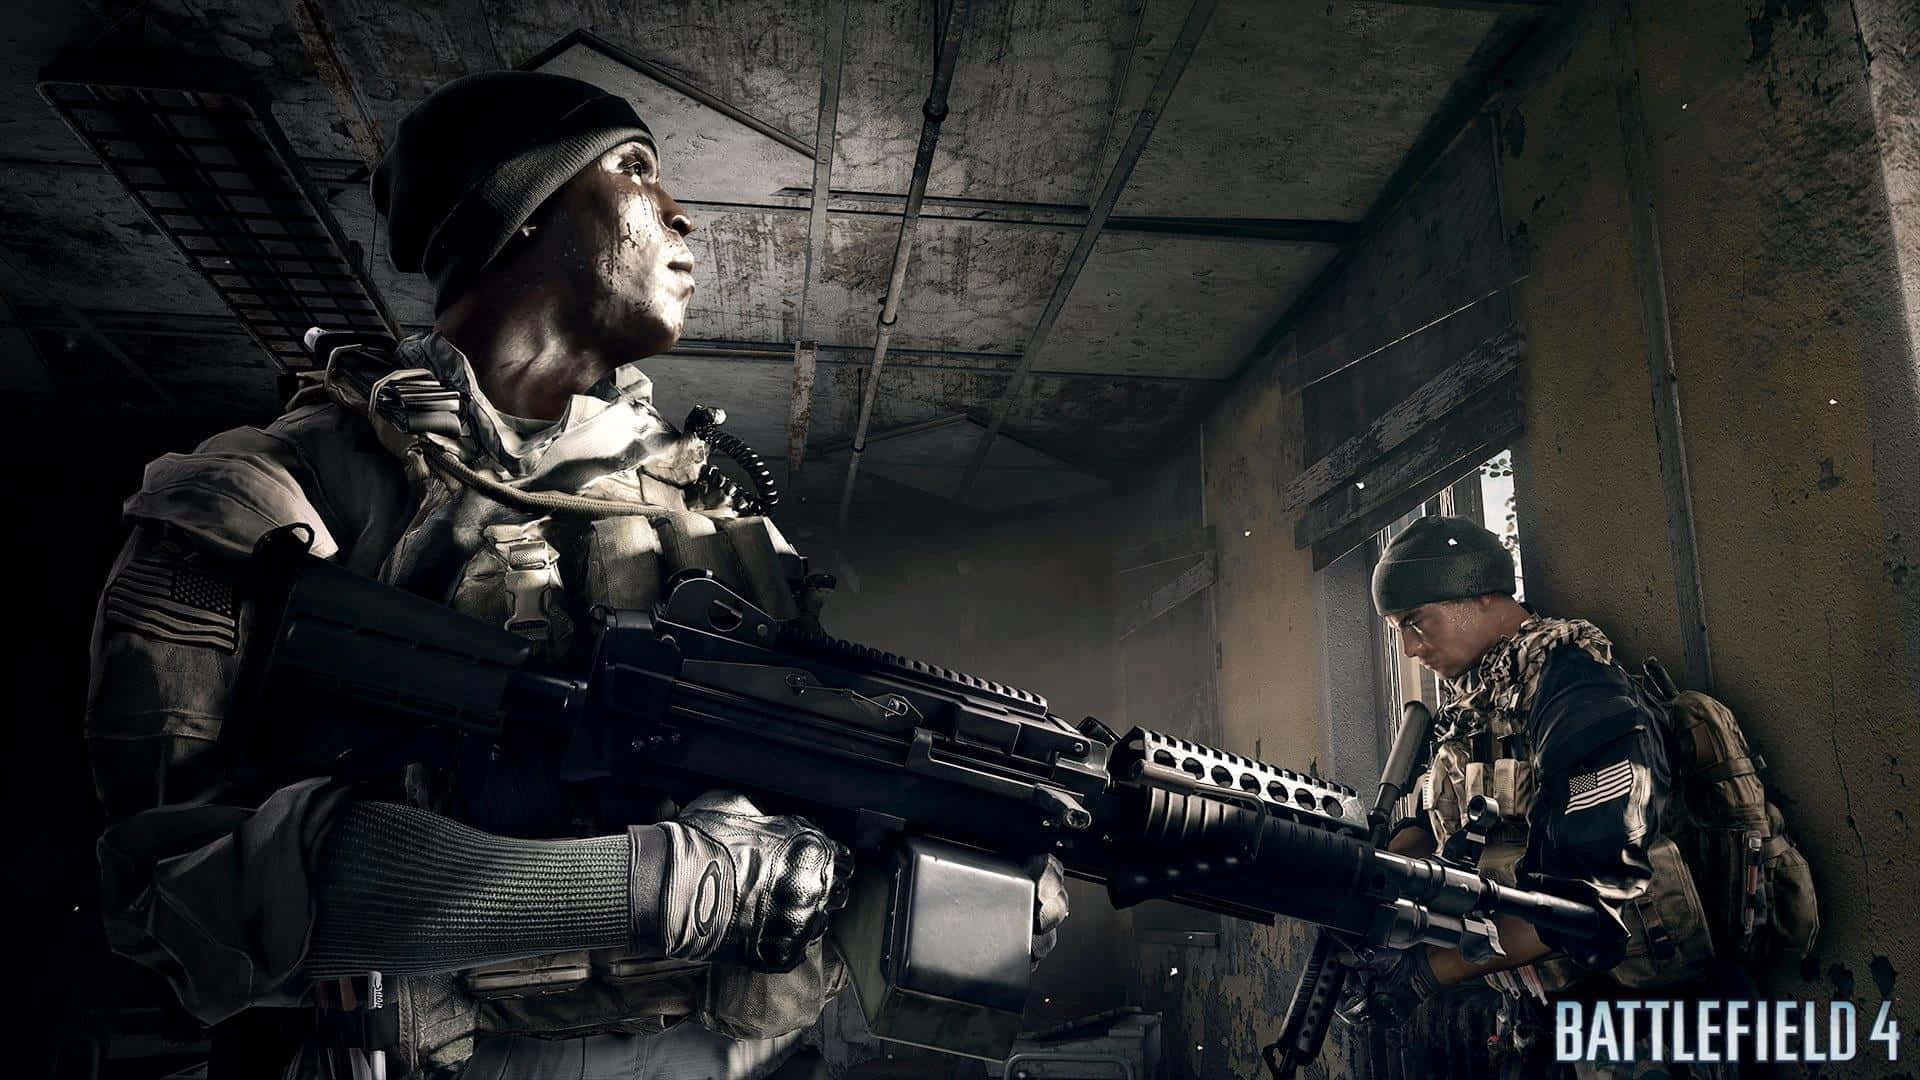 Prepare to take on enemies in thrilling warfare with Battlefield 4